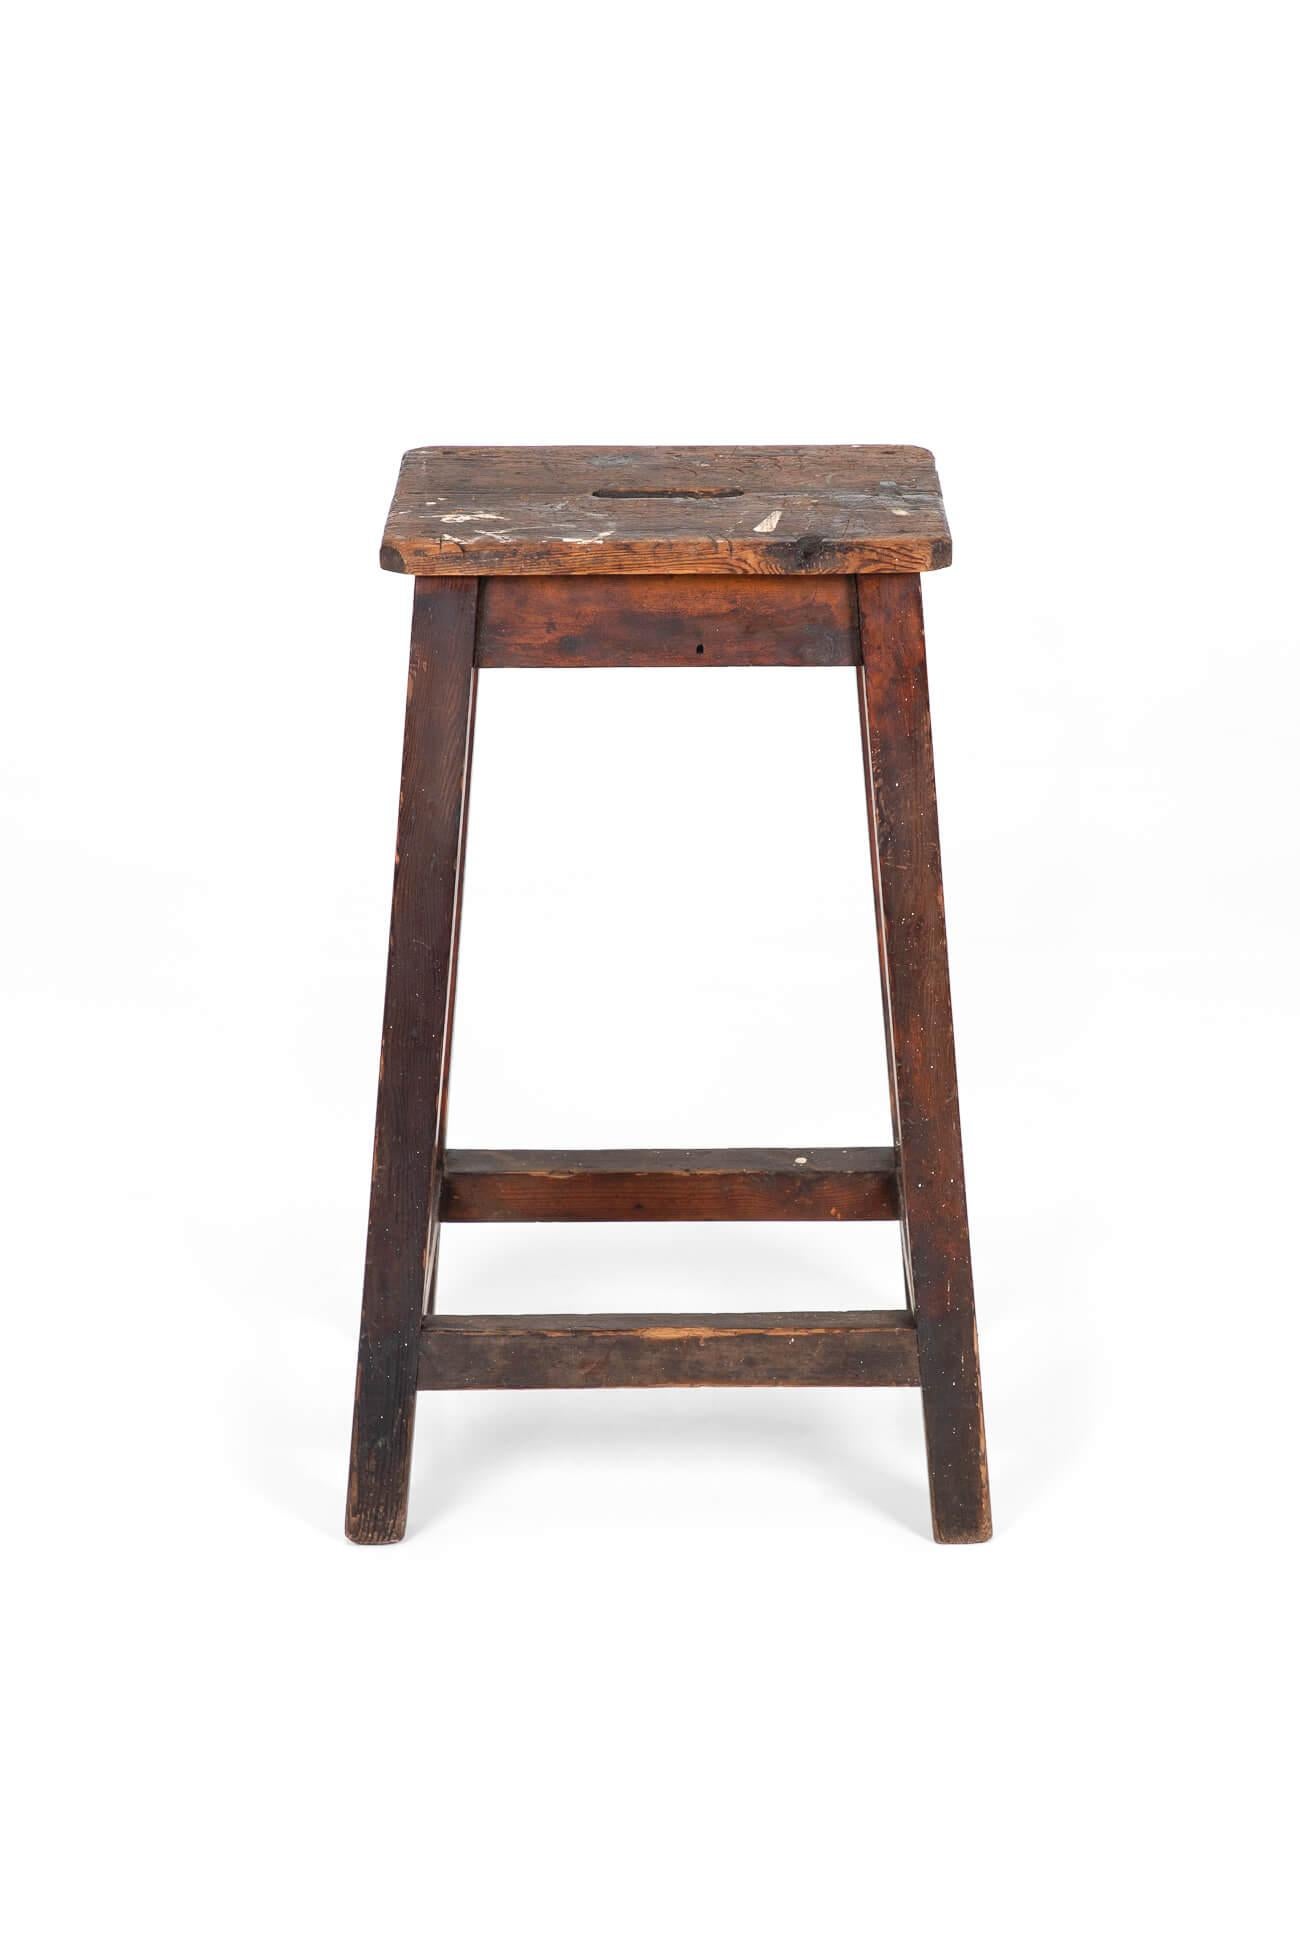 Victorian English laboratory stool in oak. With handle to centre of seat top. Very sturdy with excellent wear and patina. 
British, circa 1890

Additional Information:
H 74 cm (H 29.1 inches)
W 38 cm (W 14.9 inches)
D 30 cm (D 11.8 inches).